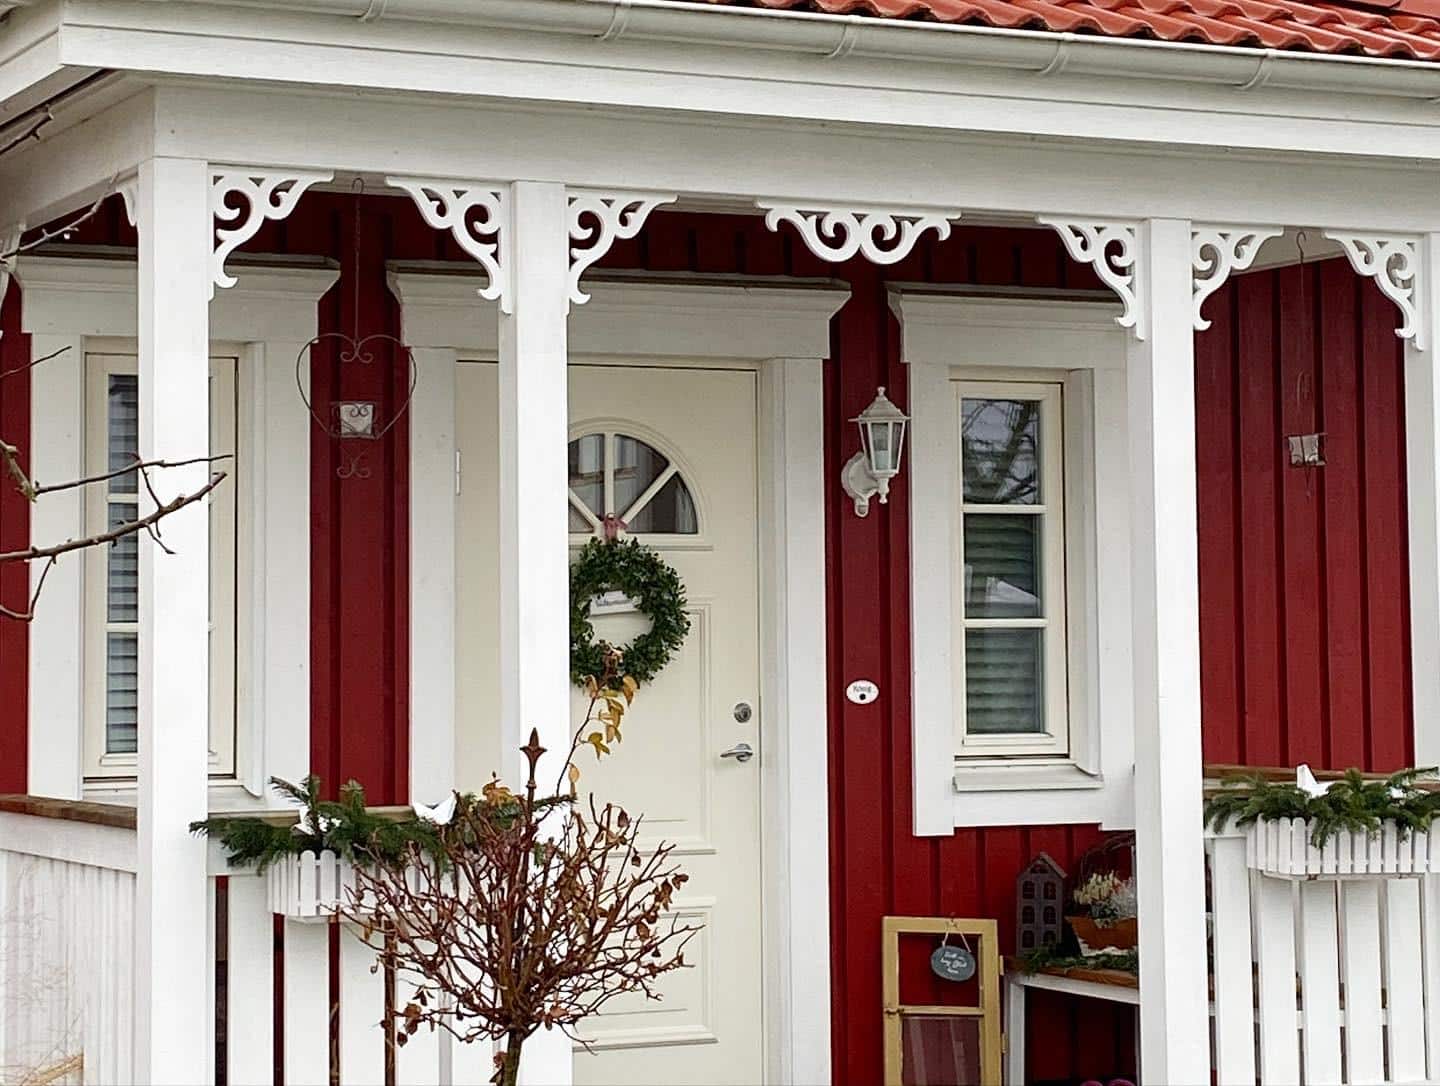 A beautiful Swedish porch with decorative ornaments and wooden brackets - painted in red and white.